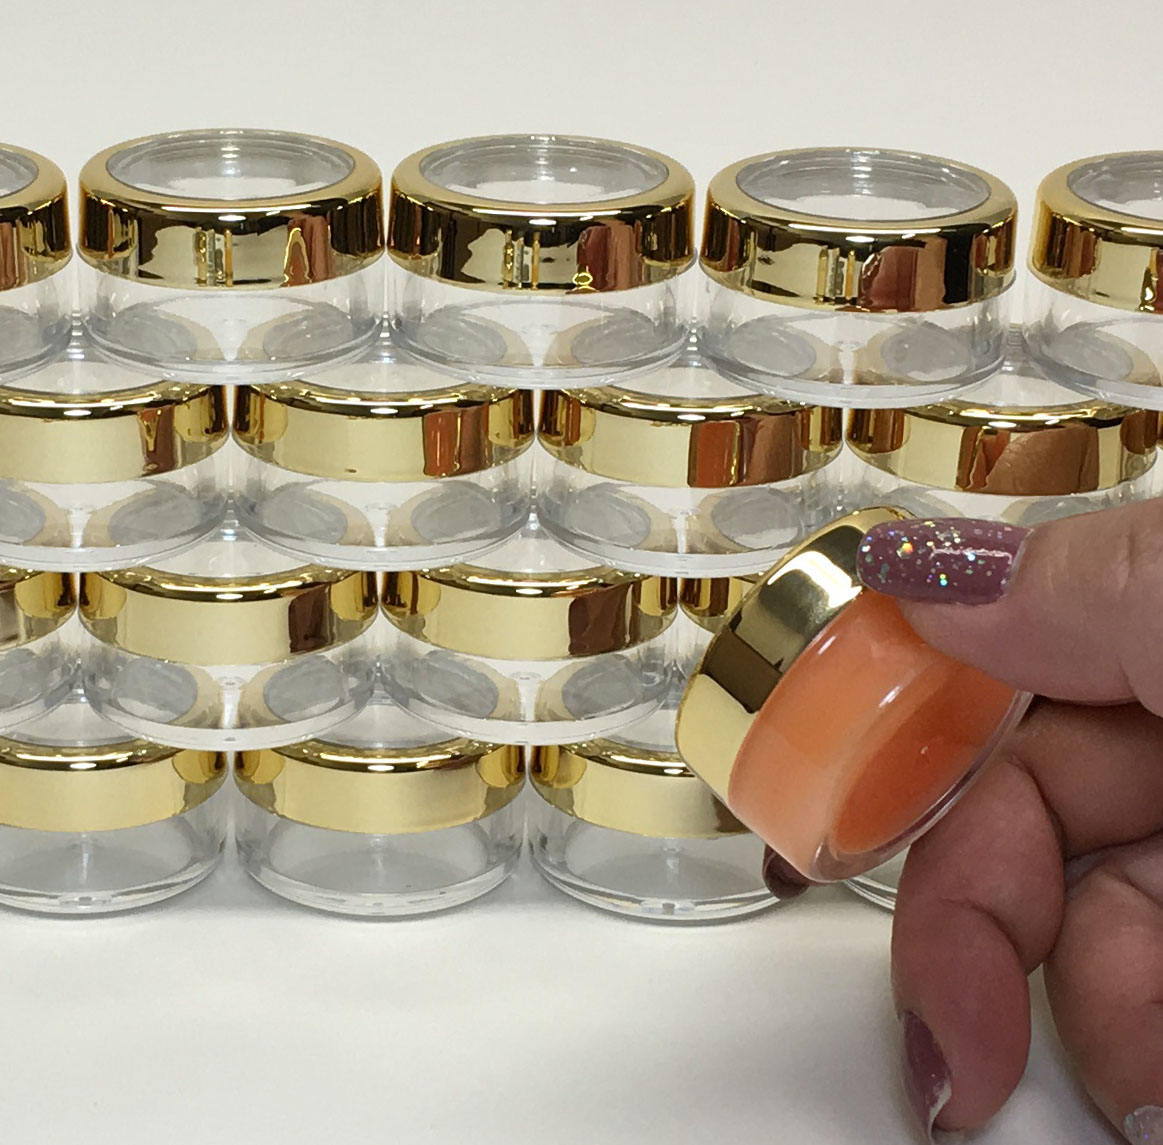 25 Beauty Lip Balm Eyeshadow Containers Empty Plastic Small Cosmetic Makeup Jars Gold Trim Acrylic Lid 10 Gram 10 Ml (3012-25) Discount Cosmetic Jars